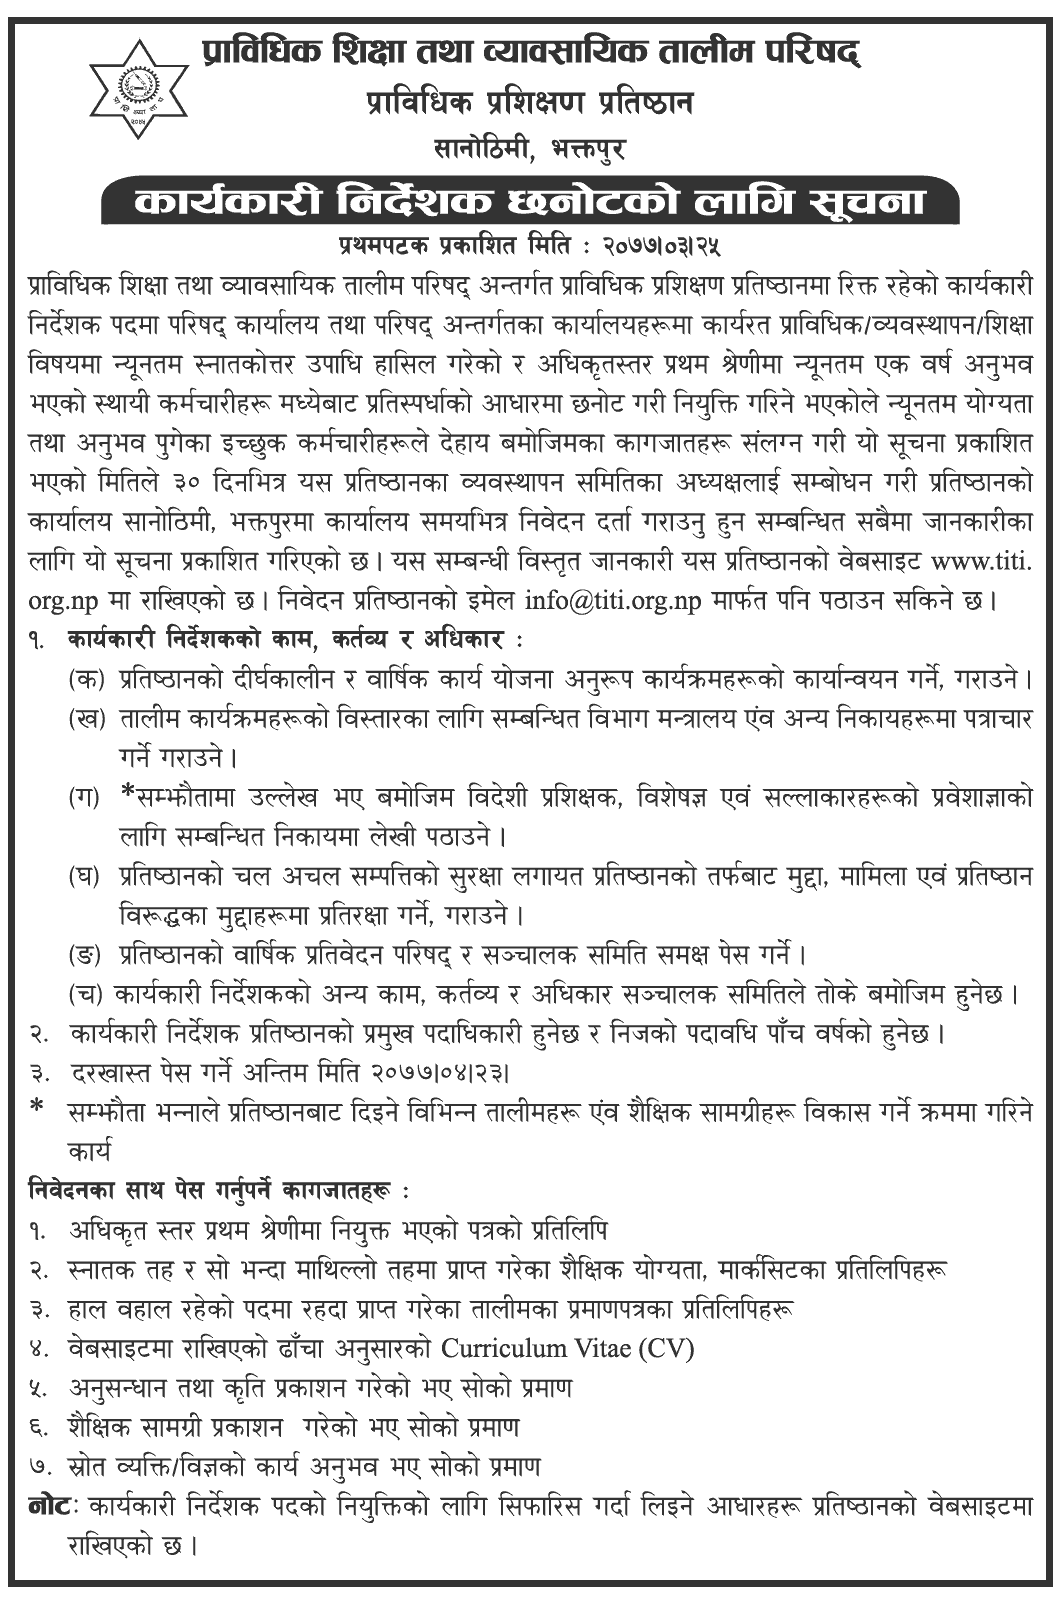 CTEVT Vacancy for the Post of Executive Director